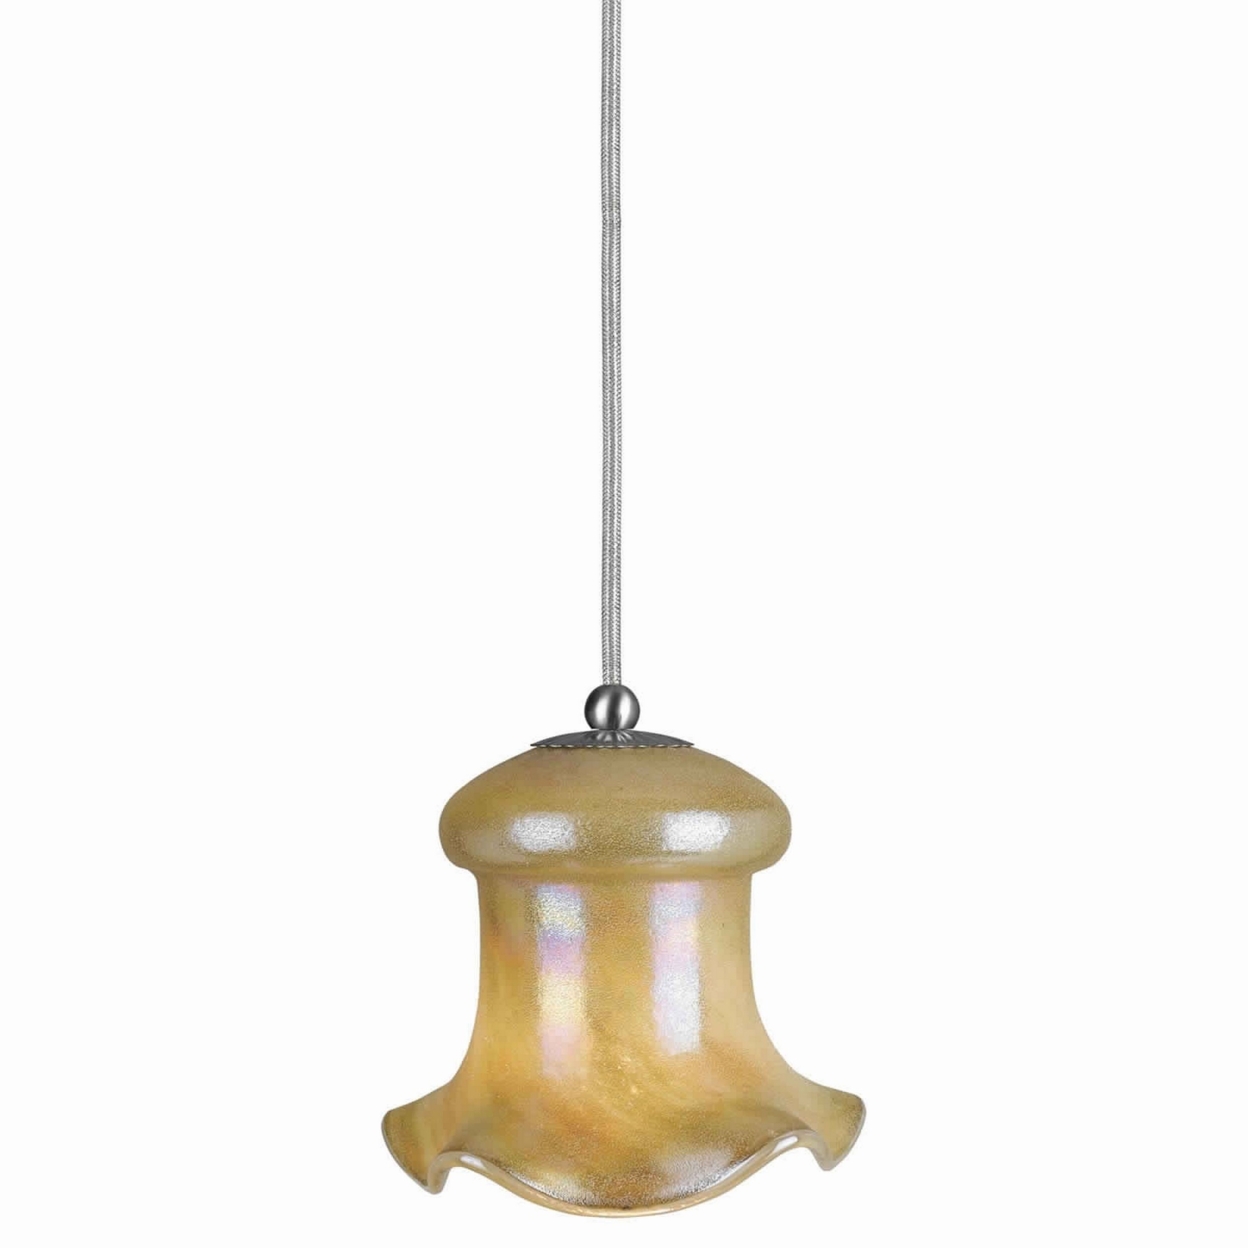 Bell Design Glass Shade Pendant Lighting With Cord, Beige And Silver- Saltoro Sherpi